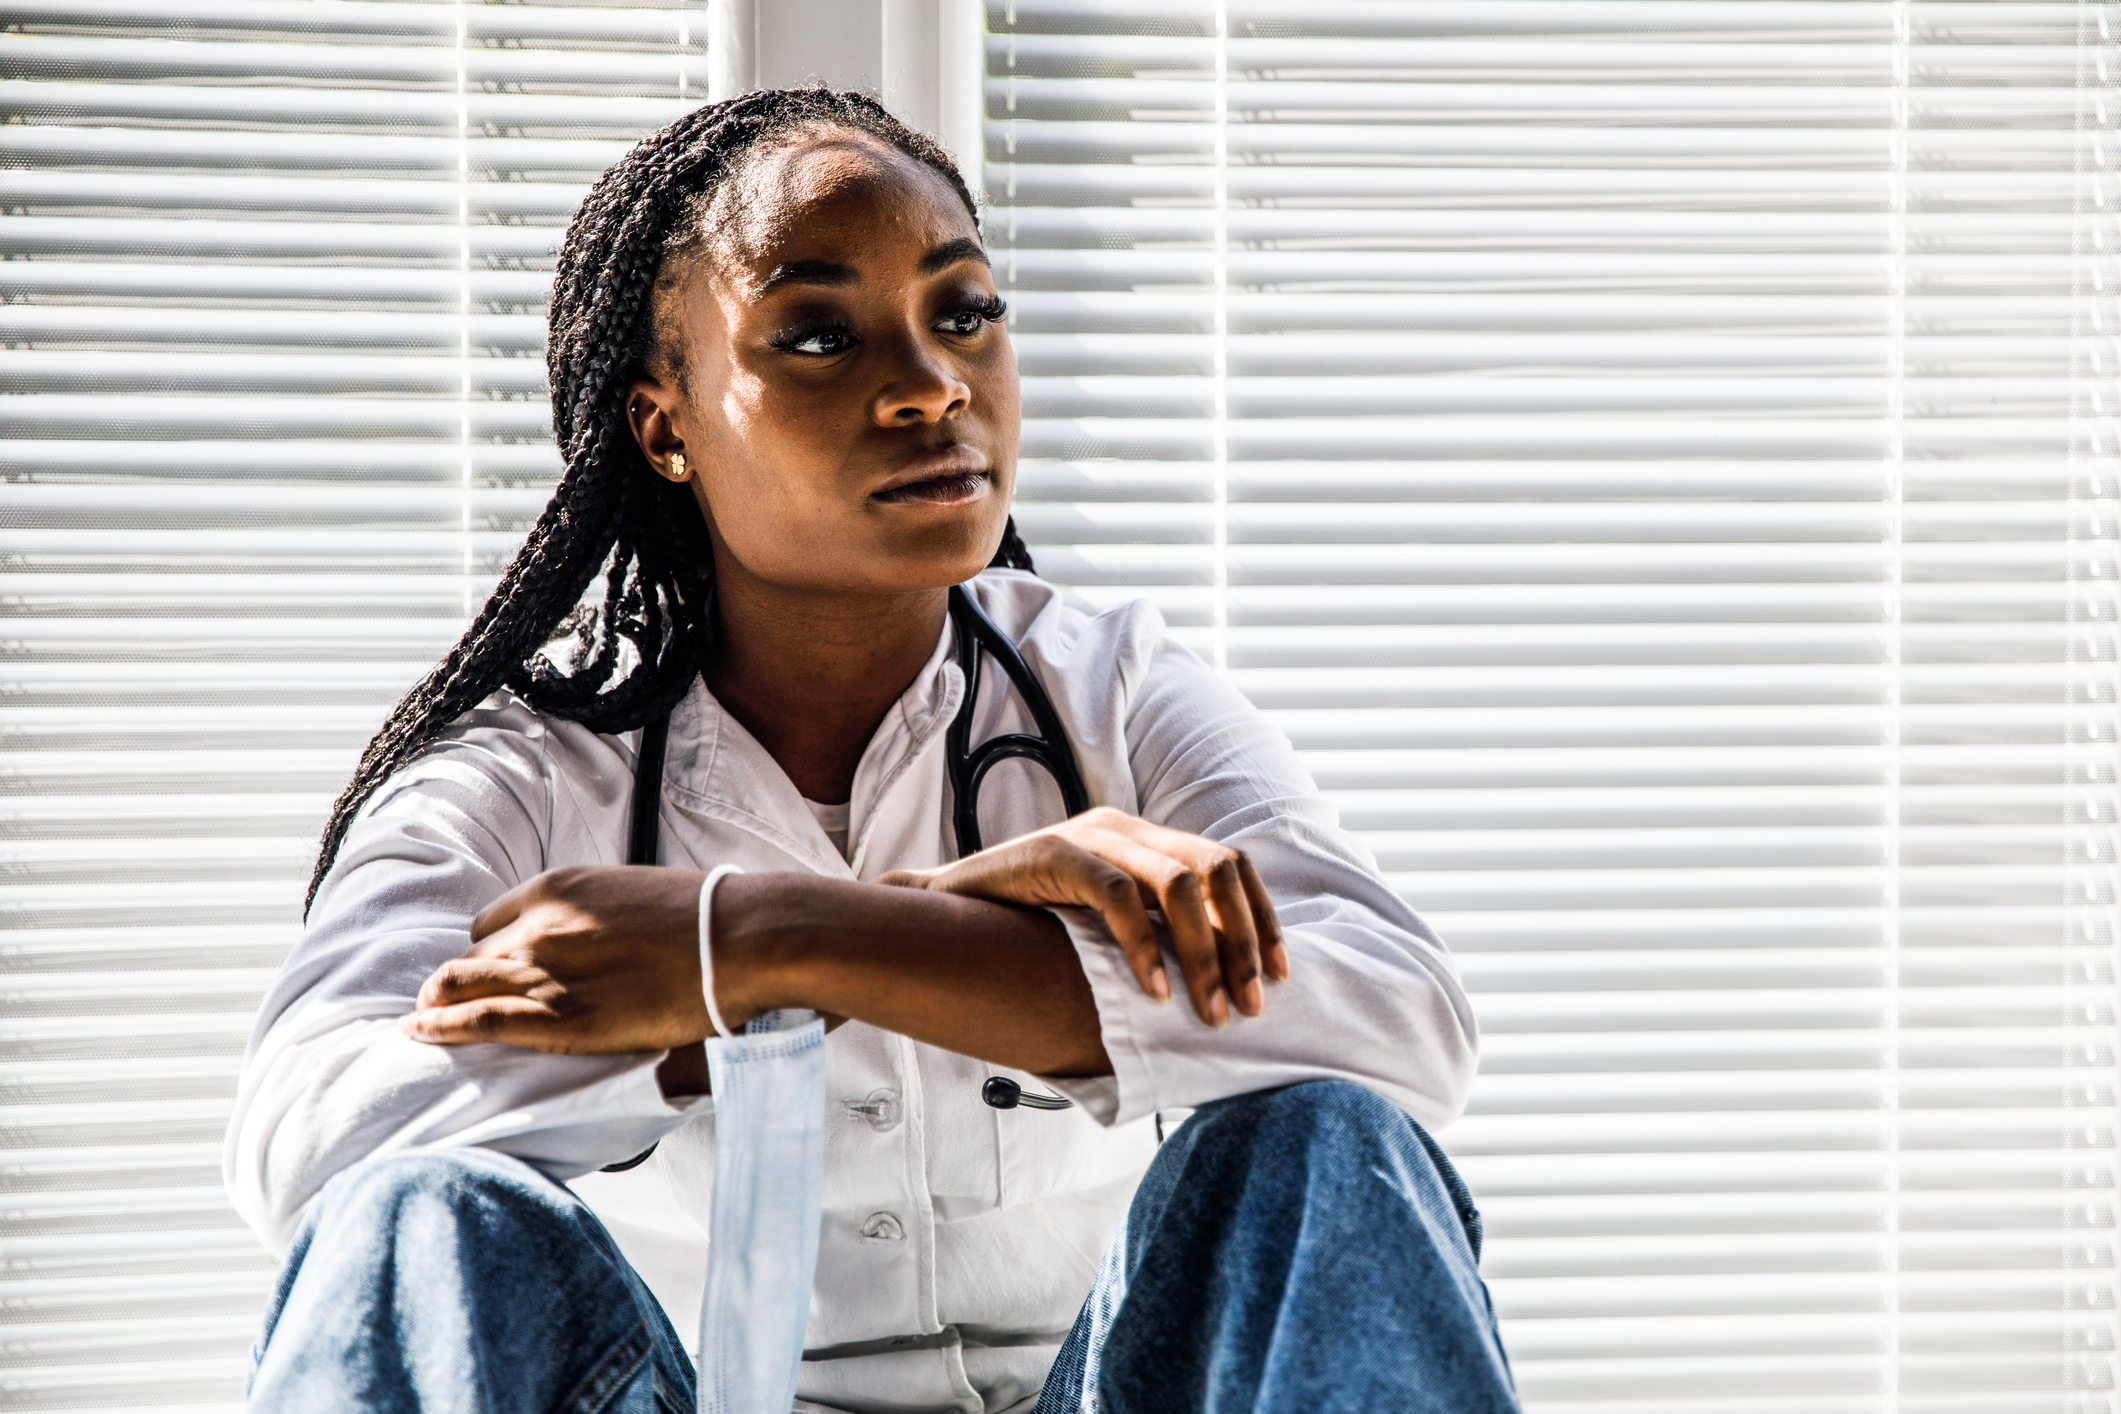 A woman with braided hair, wearing a white medical coat and a stethoscope, sits pensively in front of window blinds